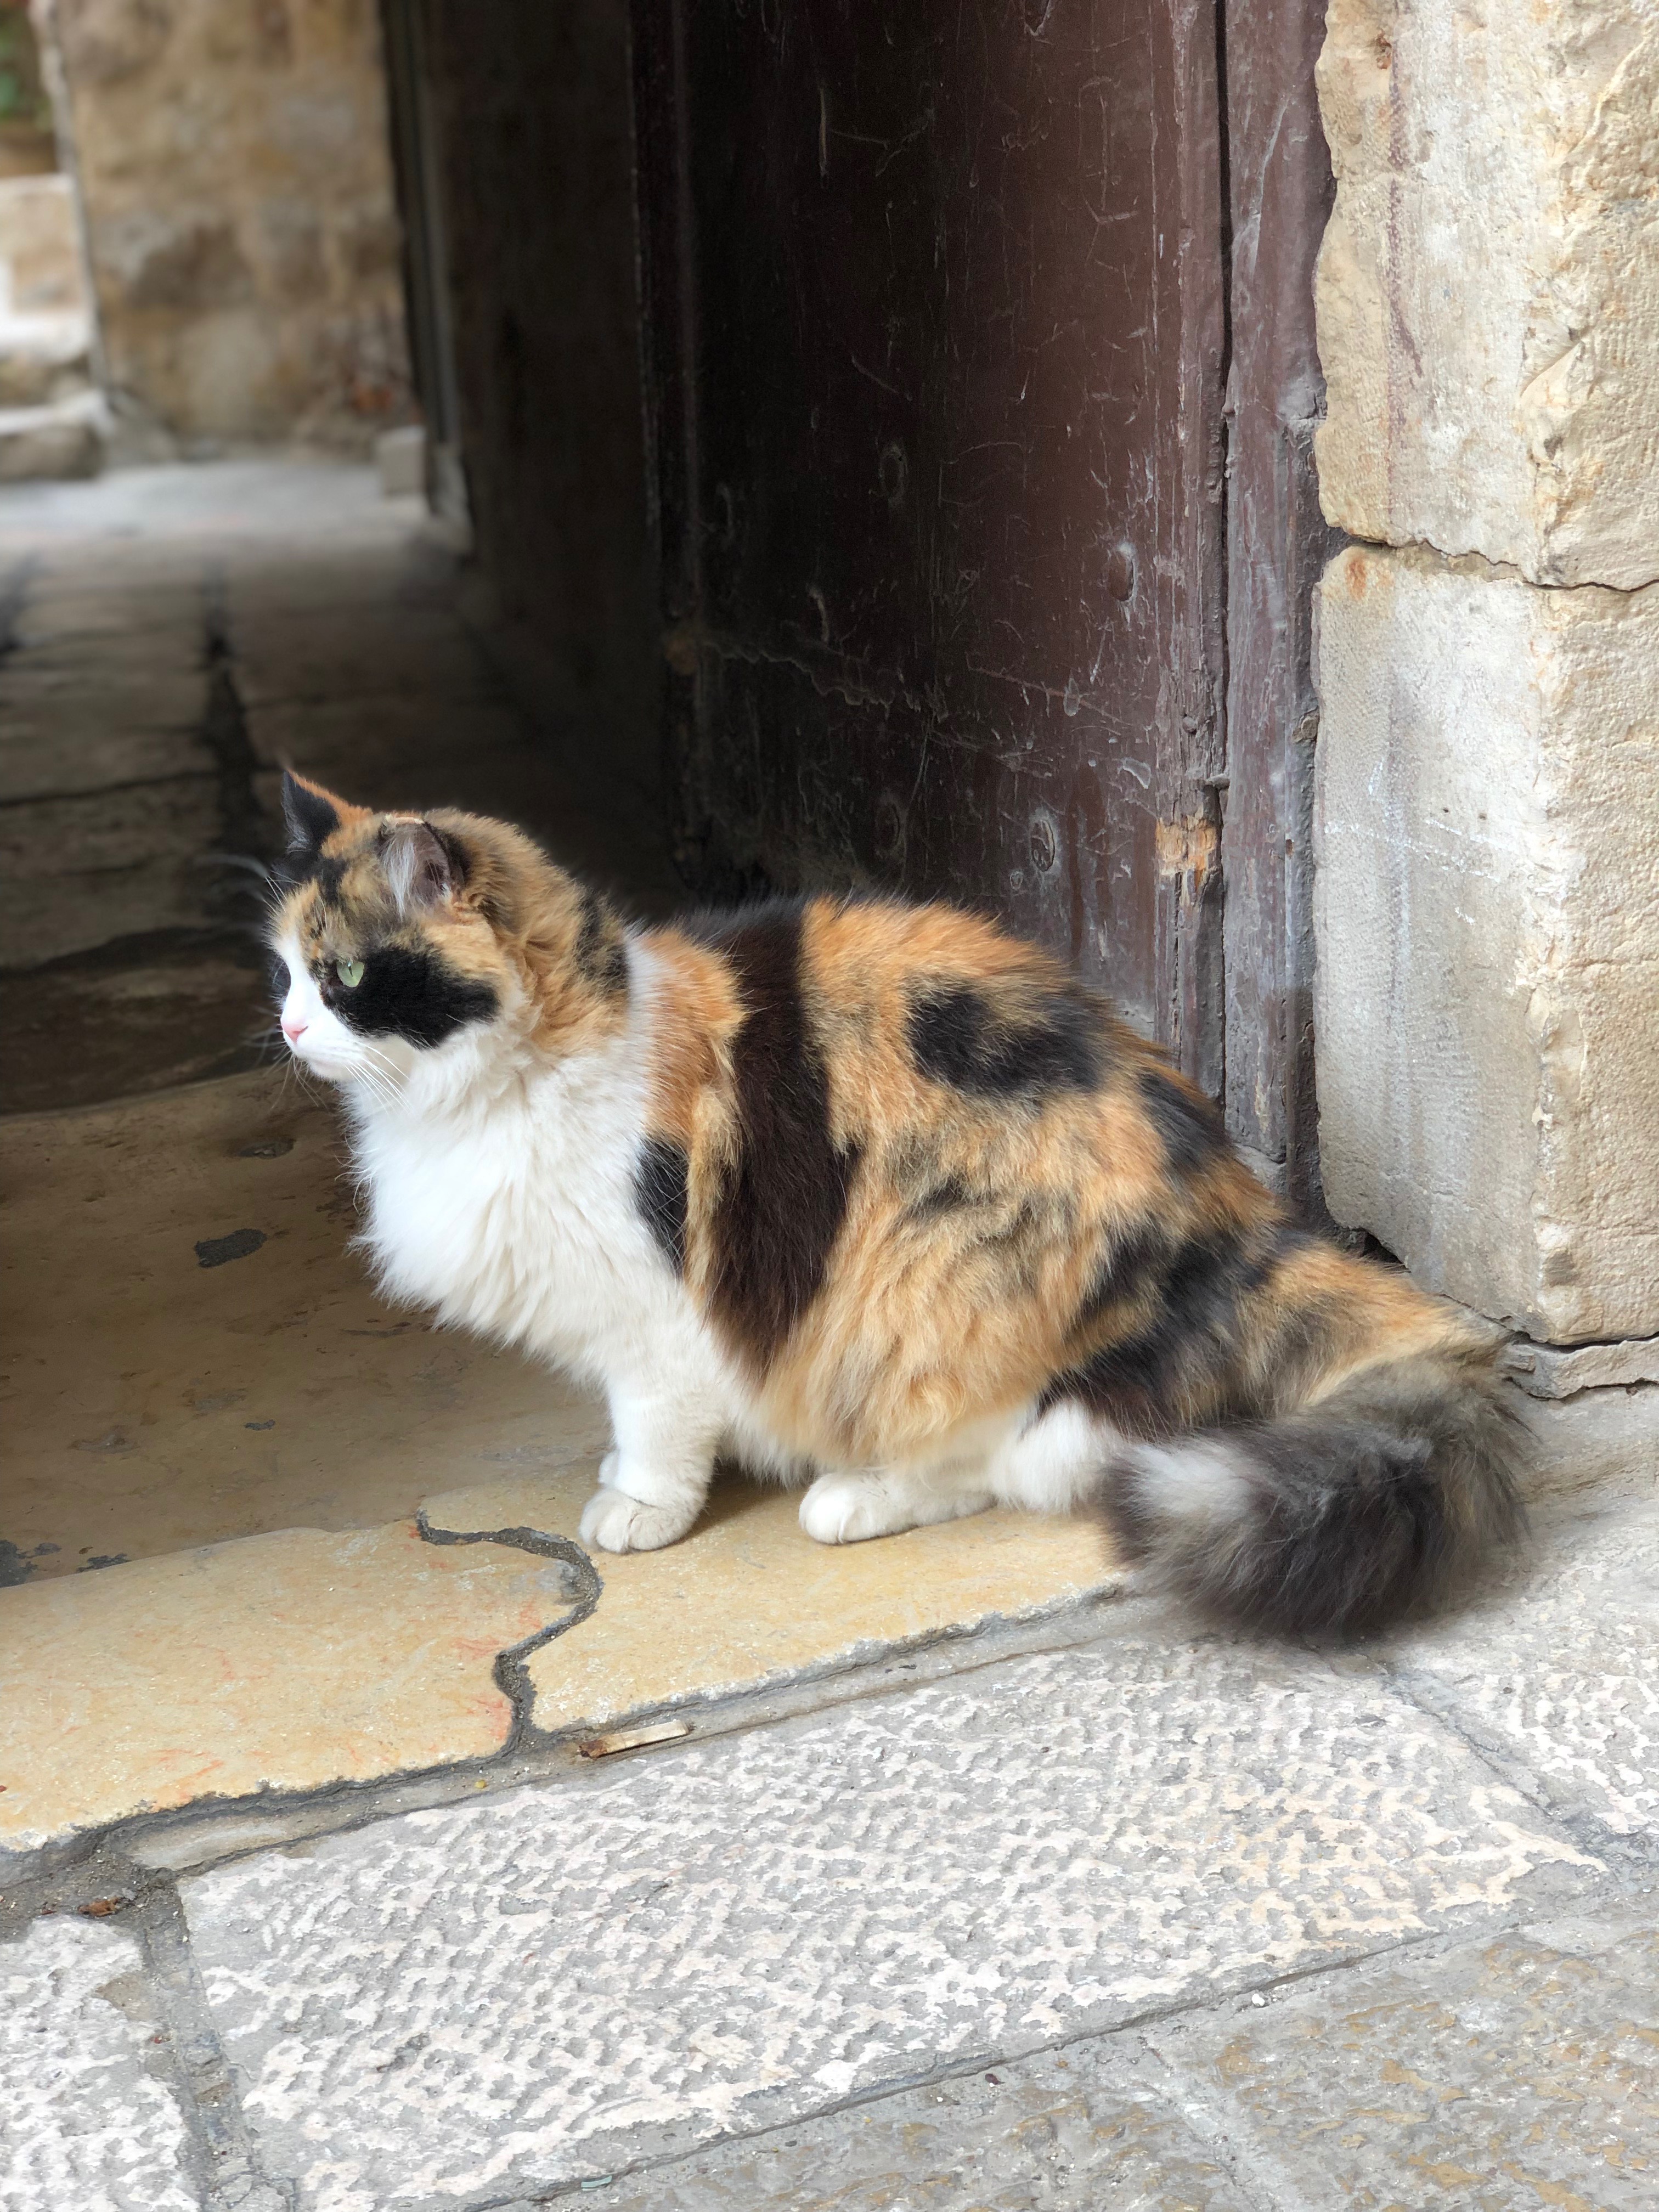 Figure 5: No clue but it&rsquo;s a grumpy cat. Probably somewhere in Jerusalem.